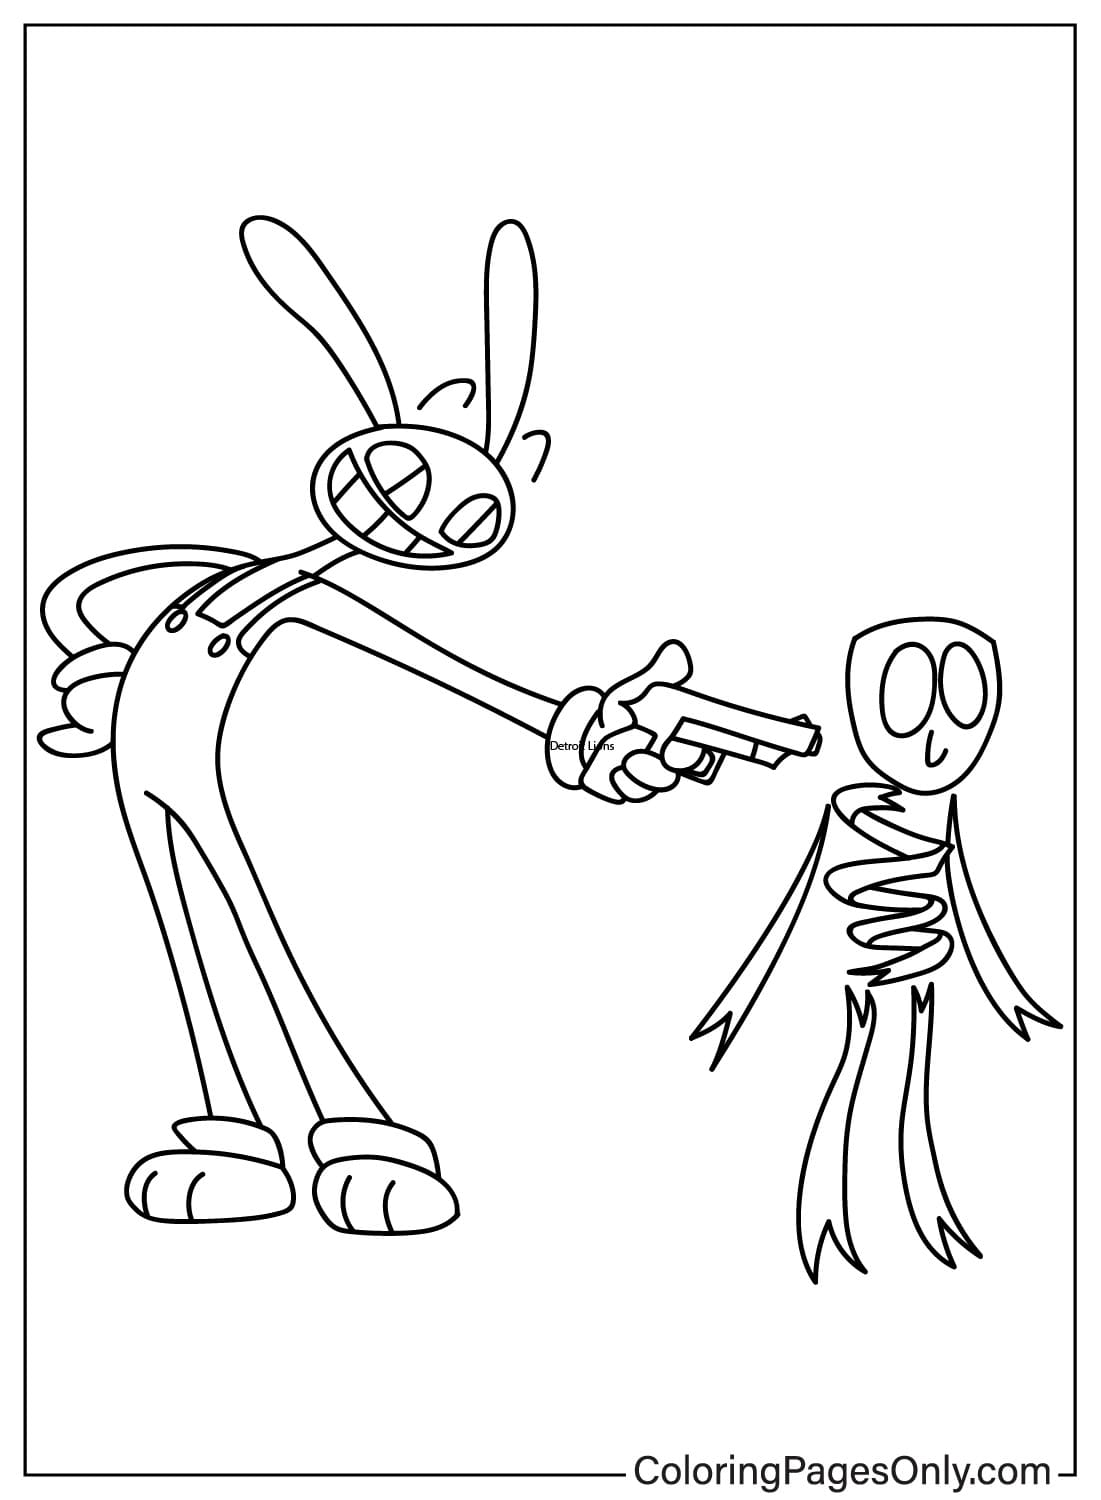 Gangle and Jax Coloring Page from Gangle